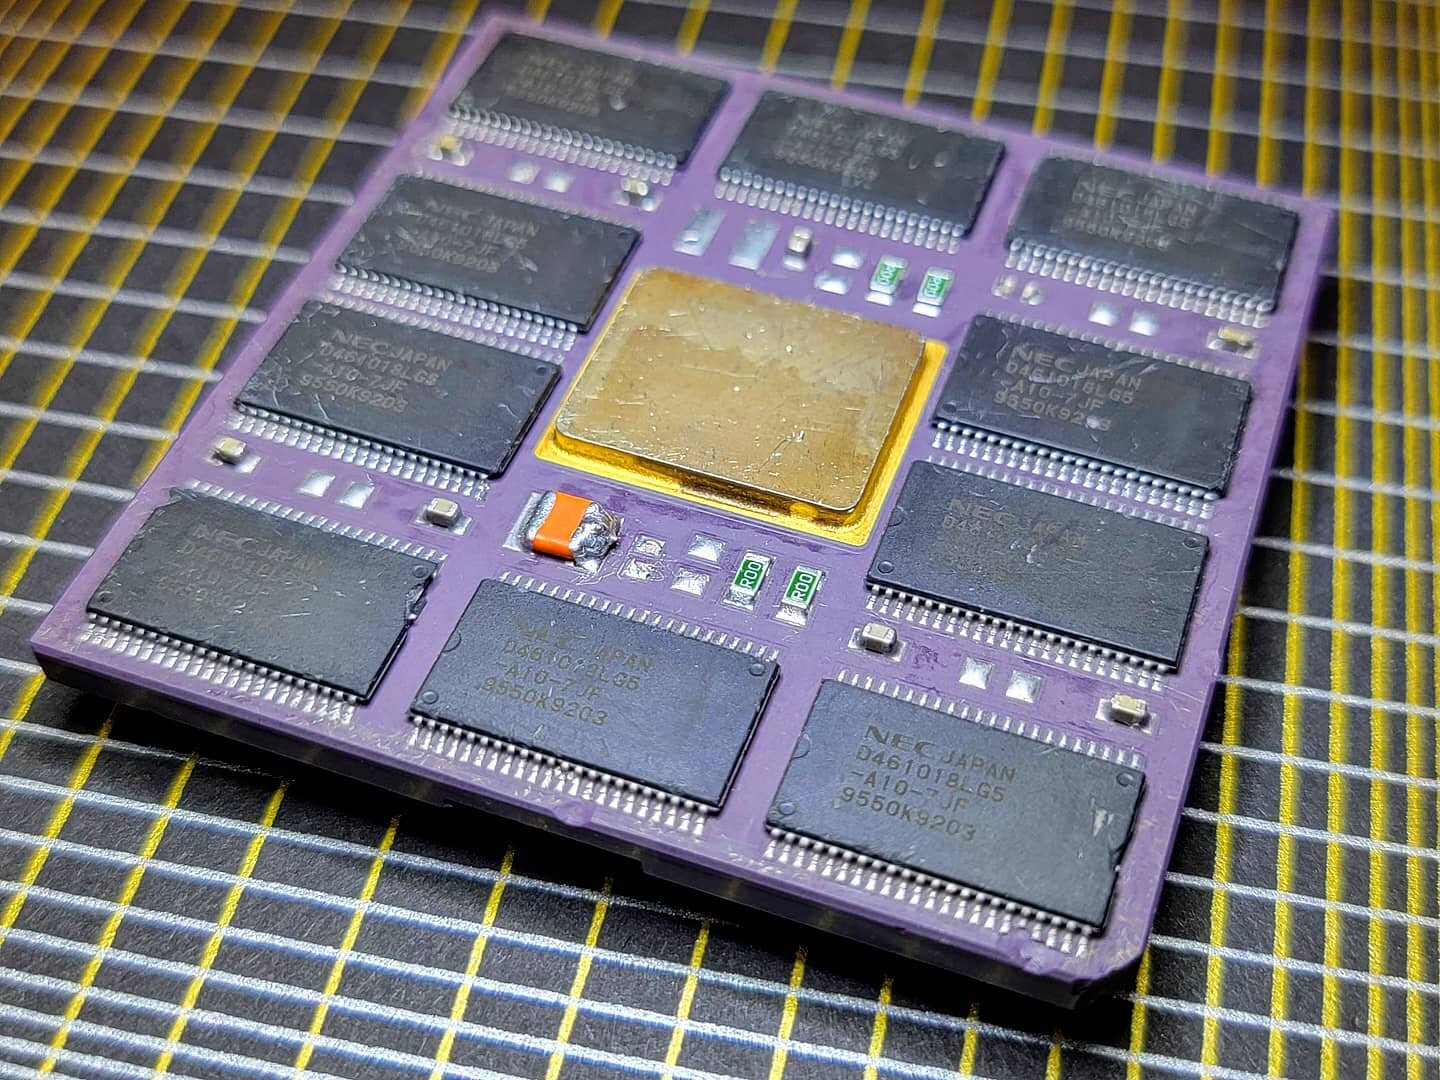 ALL ABOARD THE HYPE TRAIN! 🚂
-
Here it is, #ComponentsCloseUp number 200! No pictures of the silicon chip just yet though 😉. Can anyone identify what this is from this picture?&nbsp;
-
Stay tuned for tomorrow&rsquo;s post with the silicon pics and 